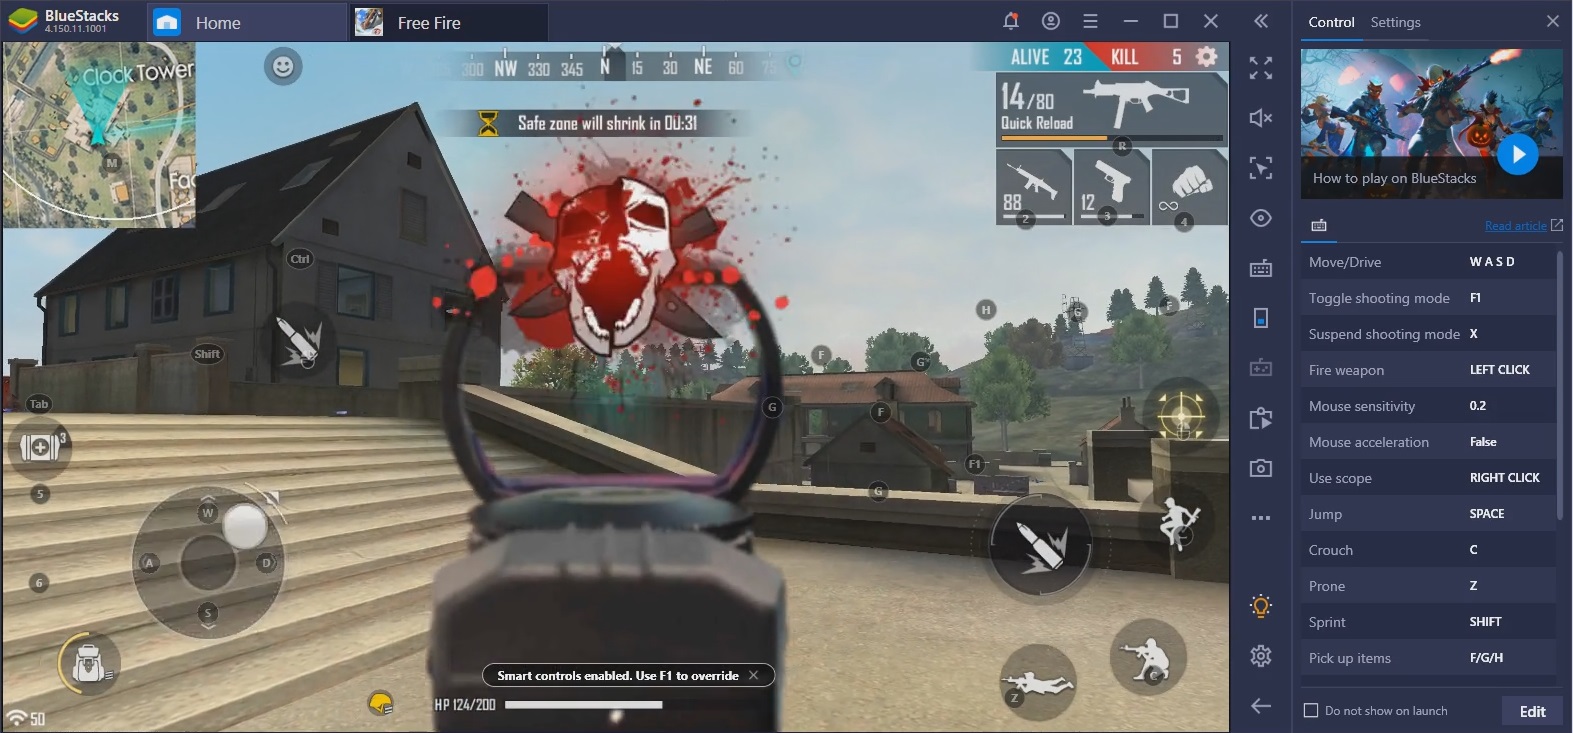 Free Fire The Ultimate Weapon Guide Bluestacks